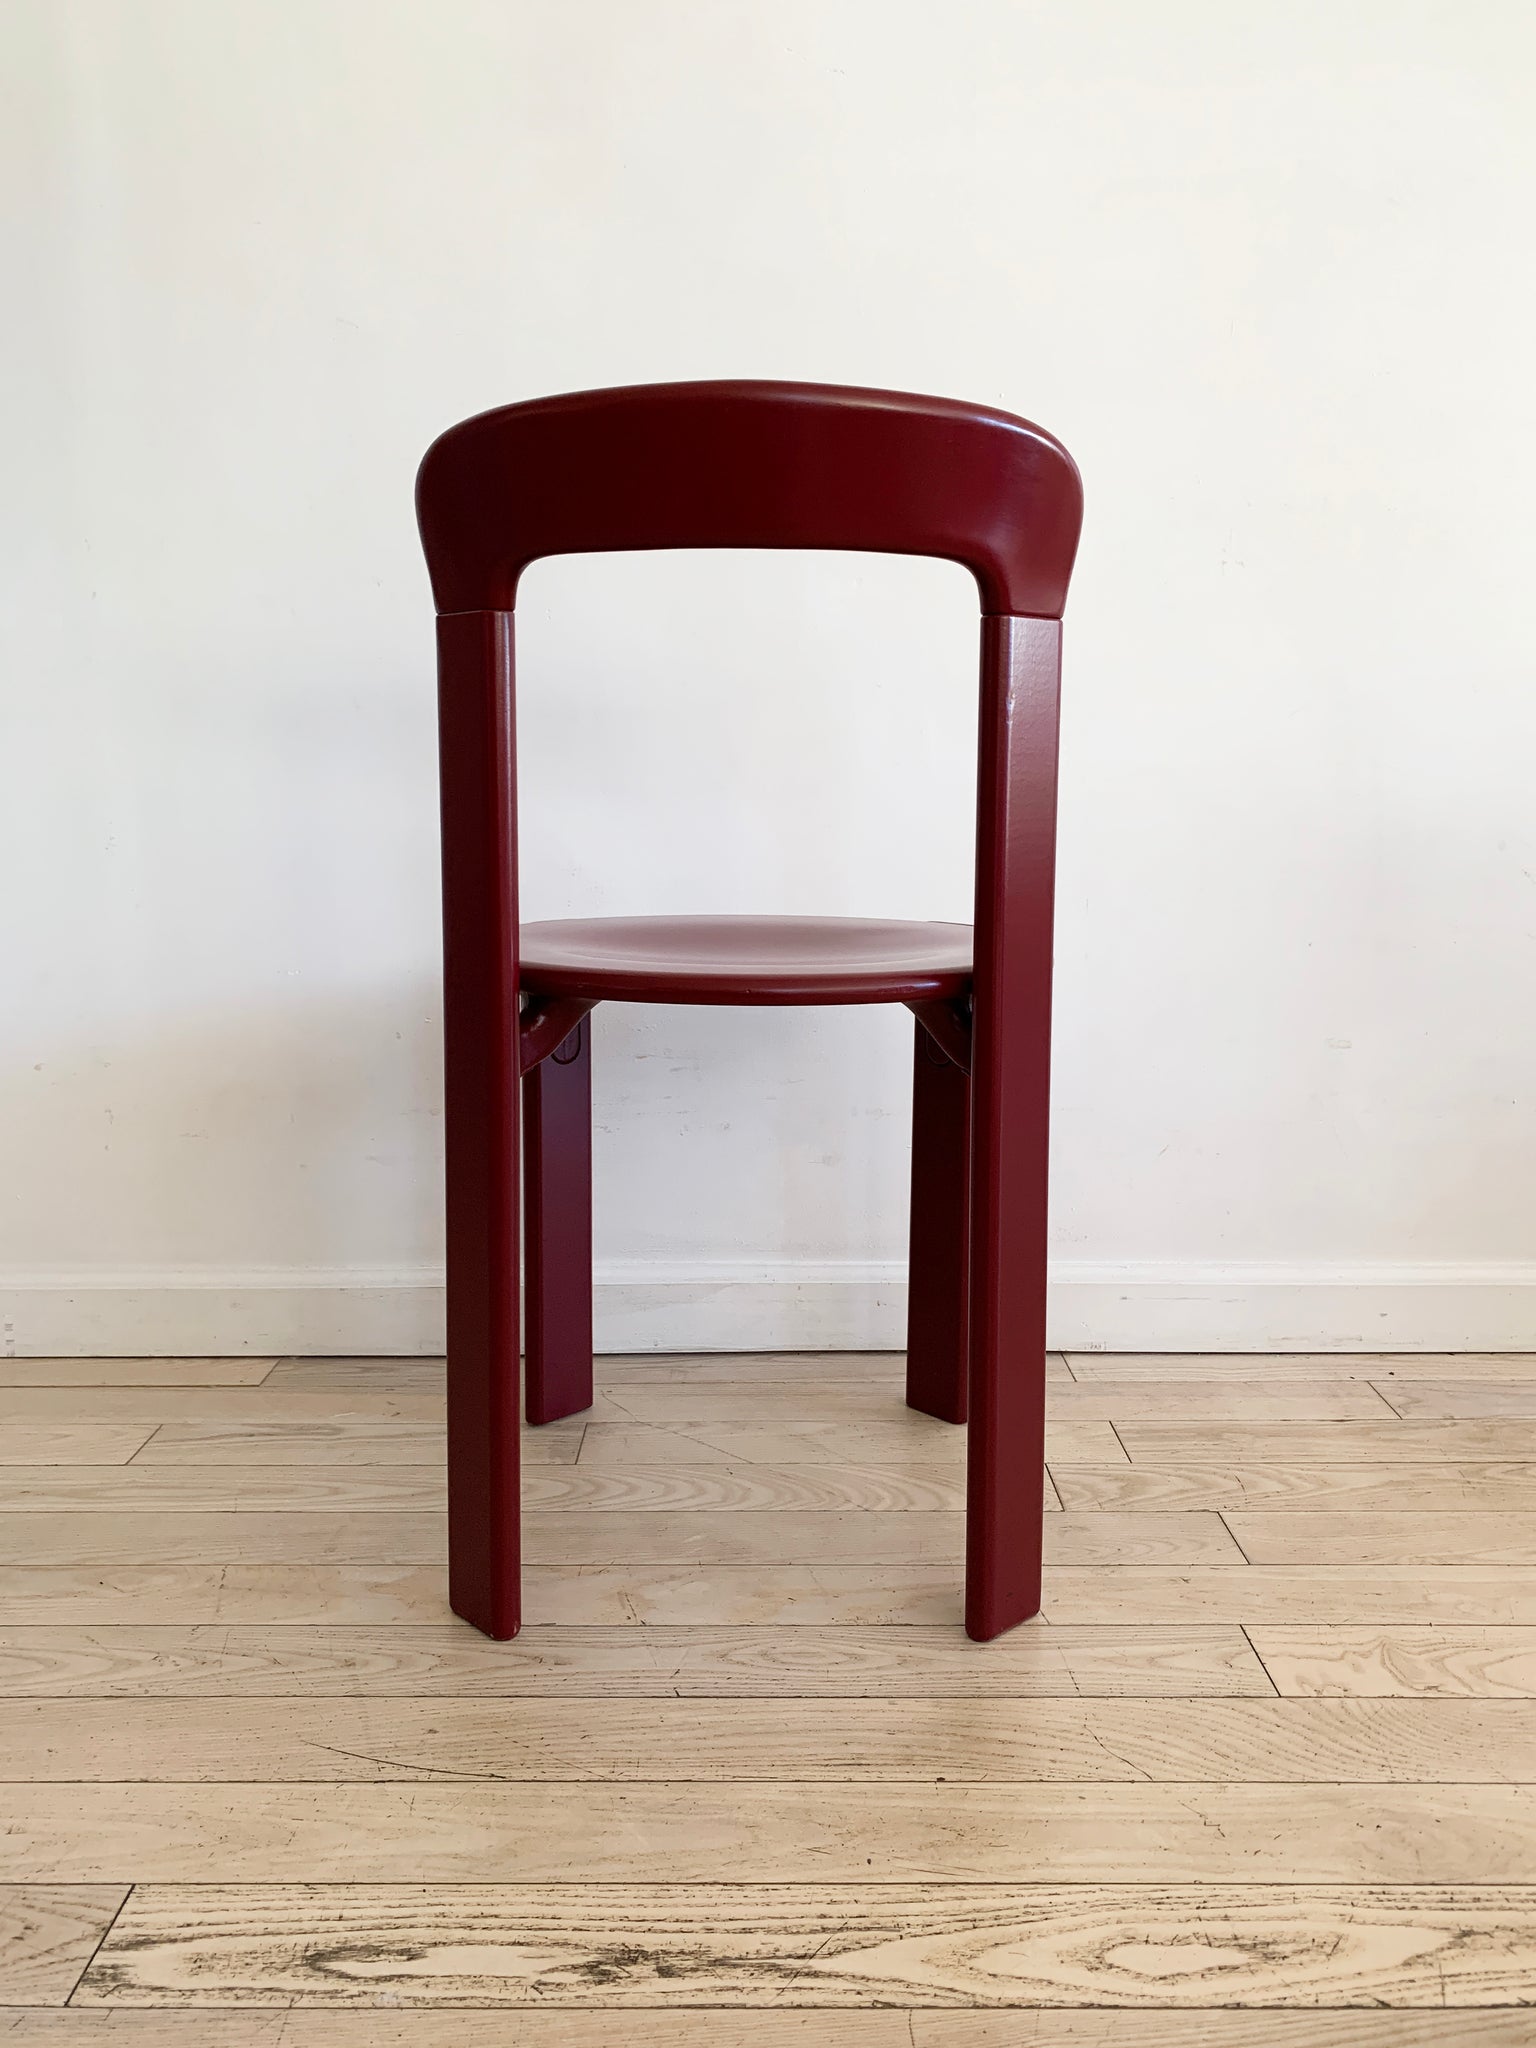 1970s Rey Stacking Chairs in Raspberry Red by Bruno Rey